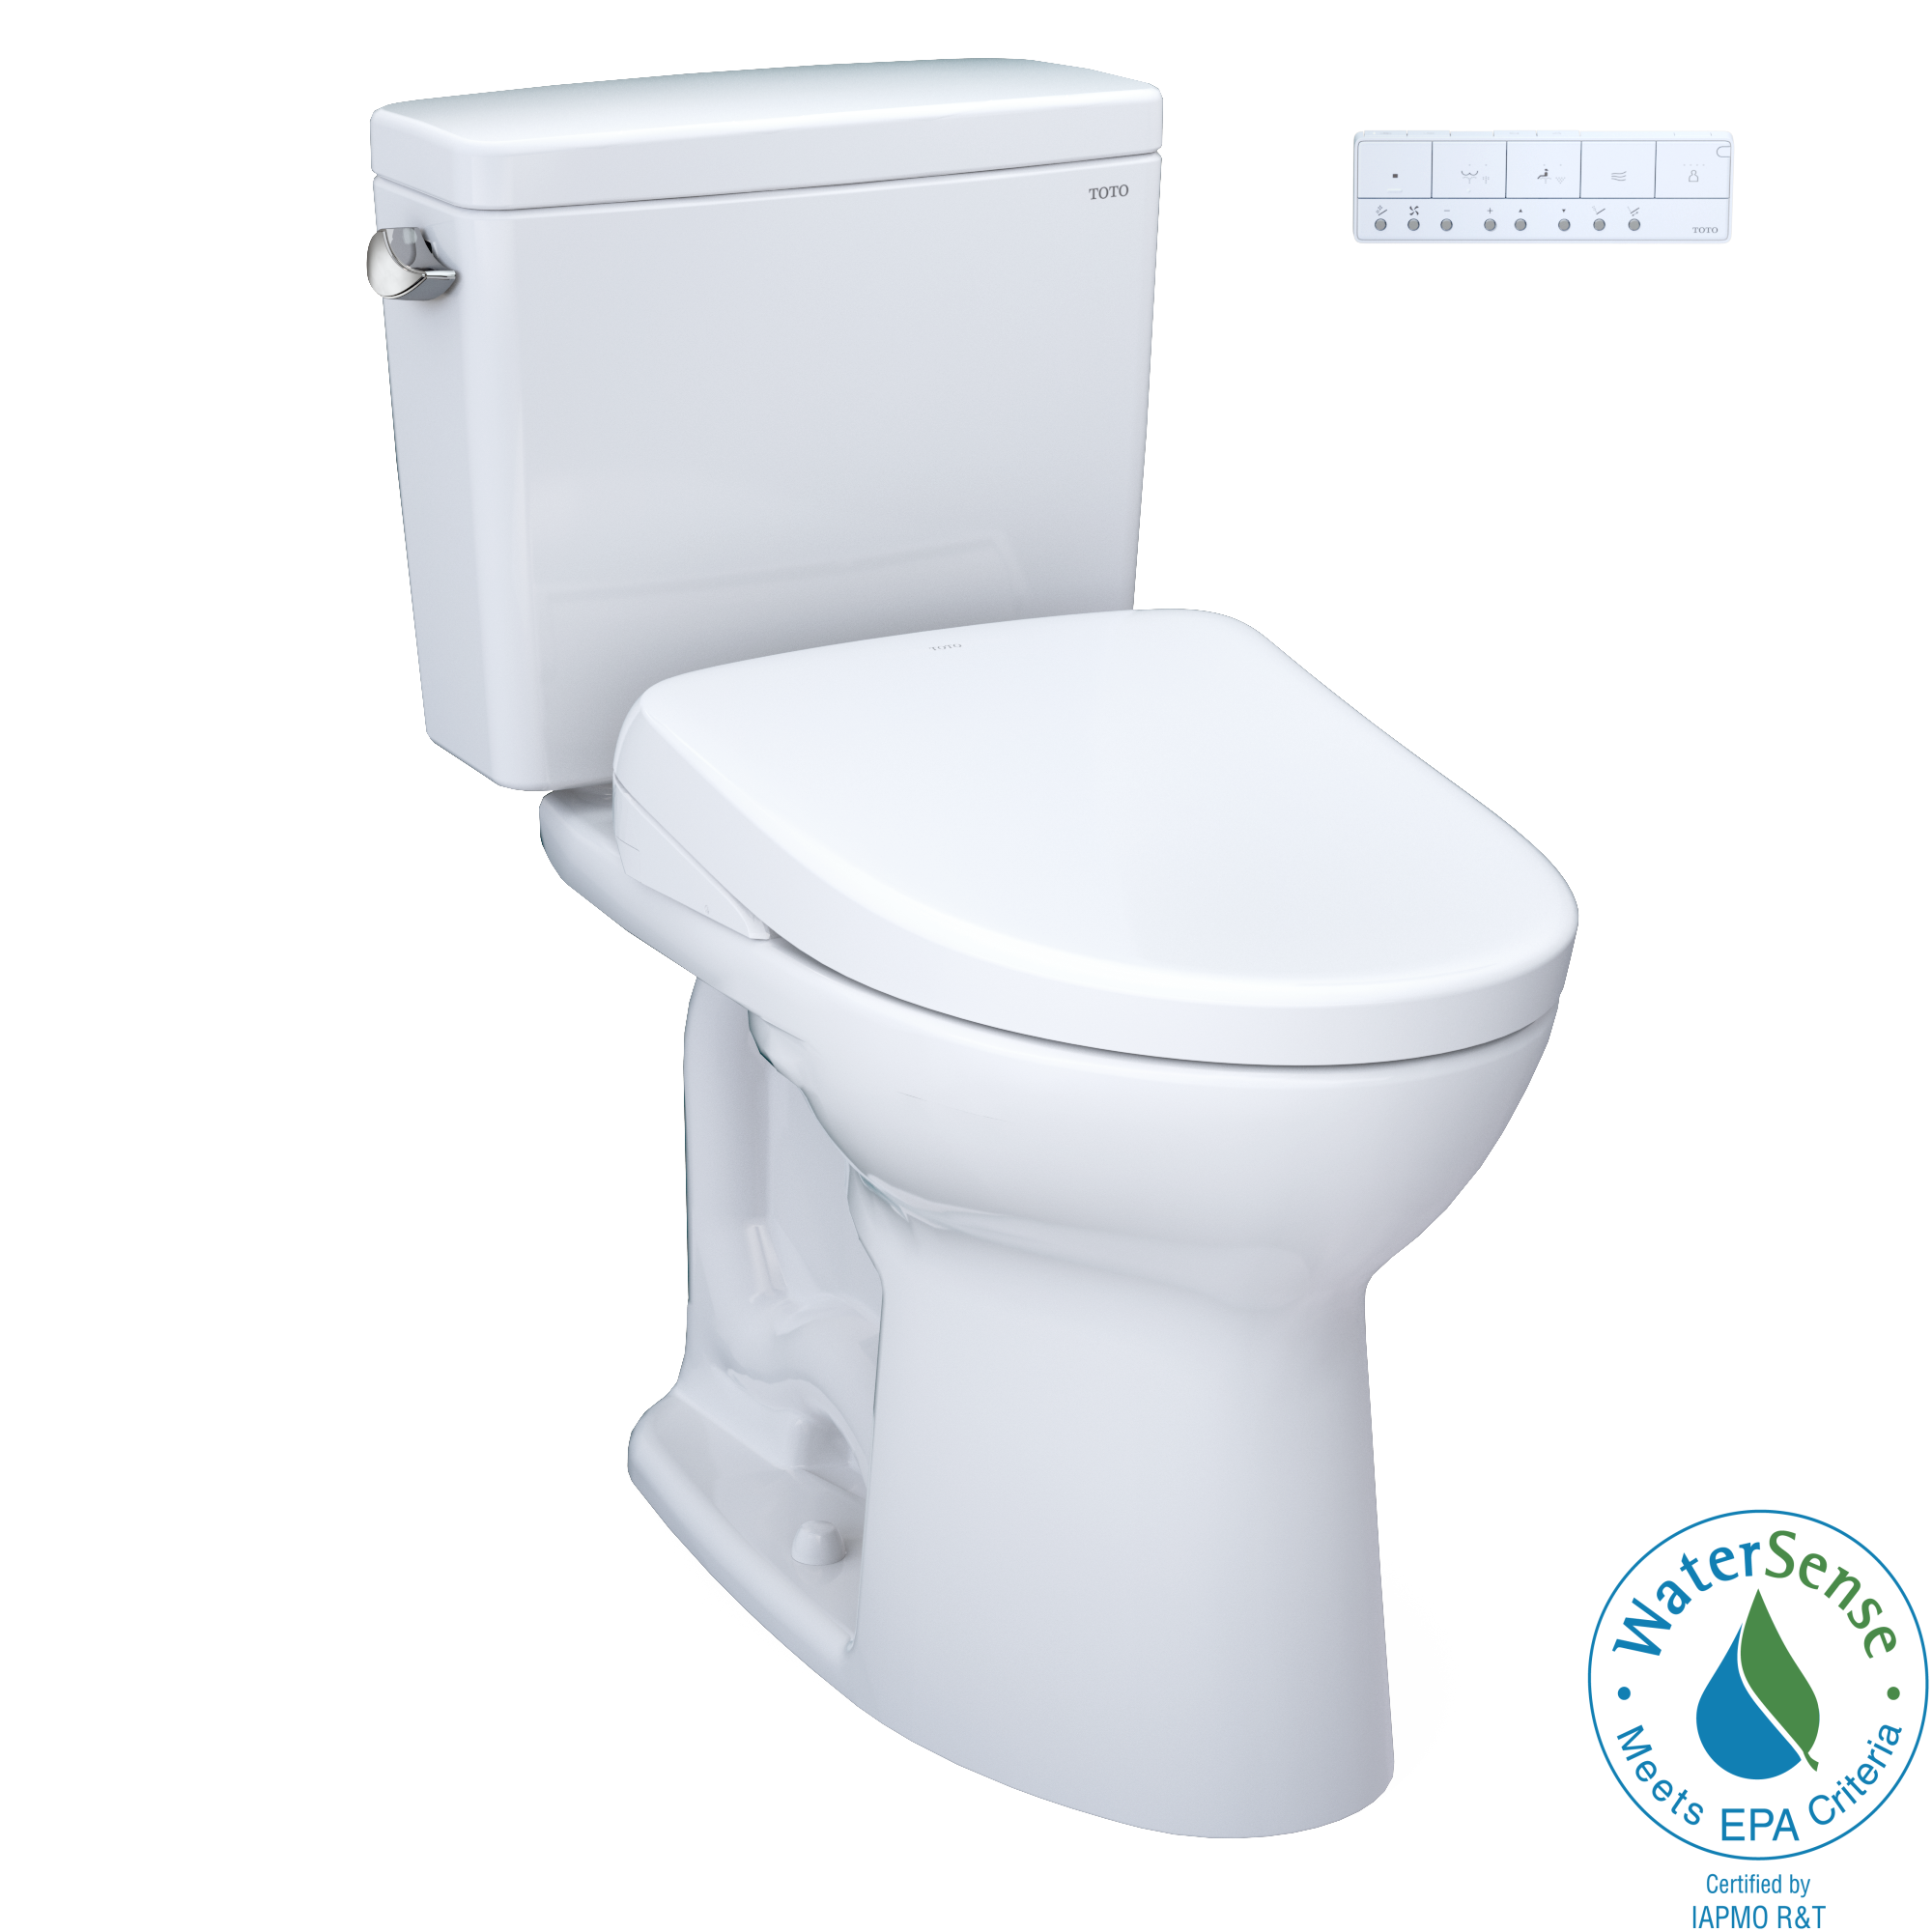 TOTO Drake WASHLET+ Two-Piece Elongated 1.28 GPF Universal Height TORNADO FLUSH Toilet with S7A Contemporary Bidet Seat, 10 Inch Rough-In, Cotton White - MW7764736CEFG.10#01, MW7764736CEFGA.10#01